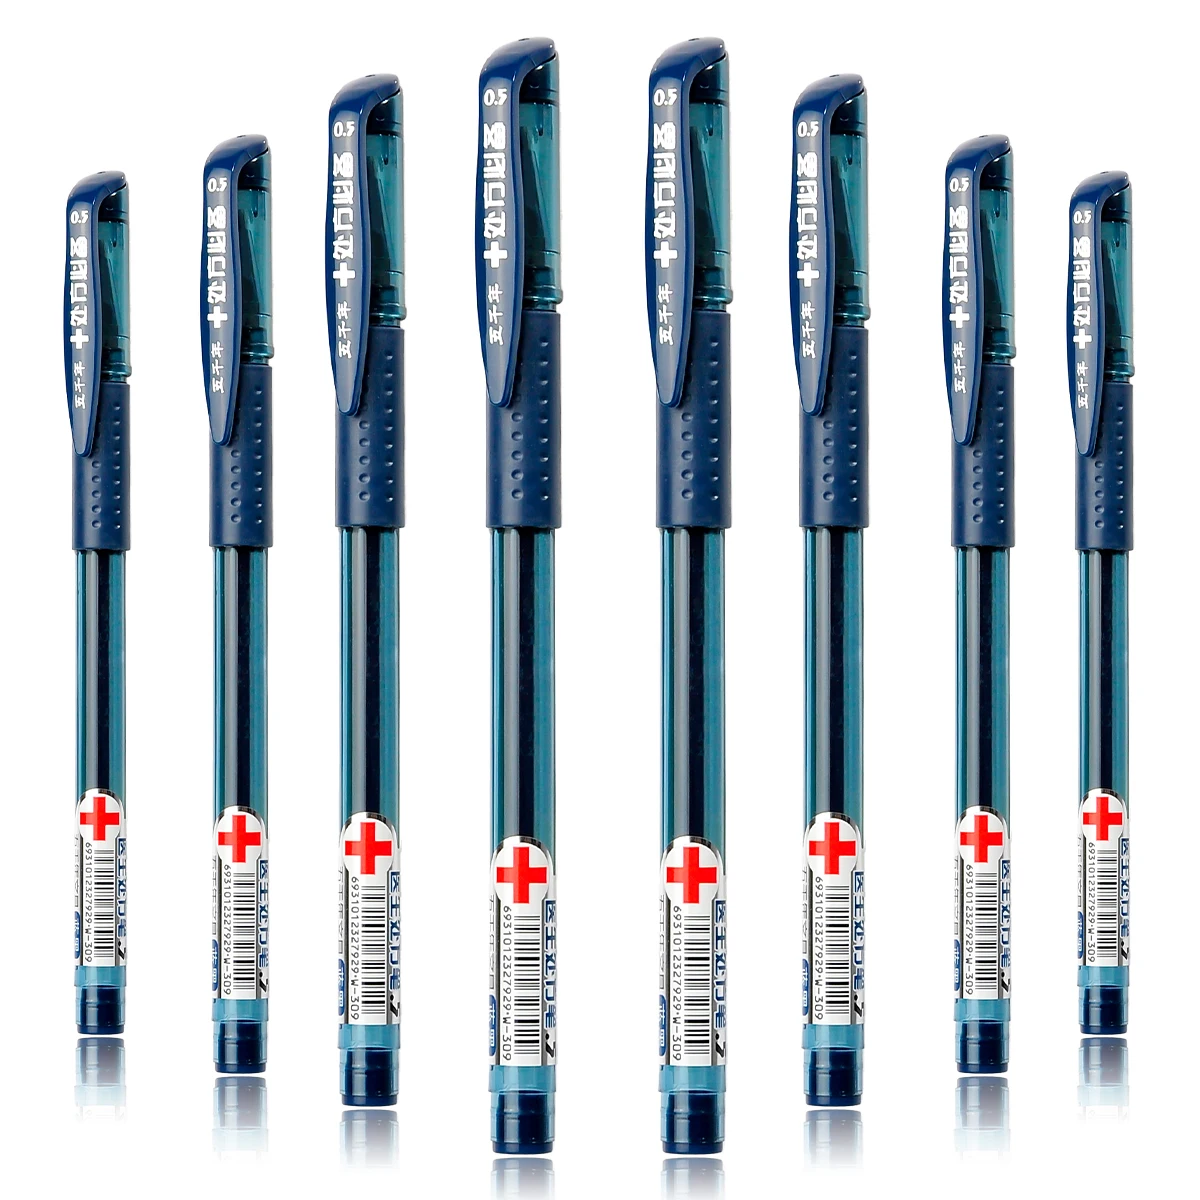 

3/6pcs blue doctor specific pens, 0.5 mm tip, quick drying, smooth touch, comfortable grip, office/doctor supplies